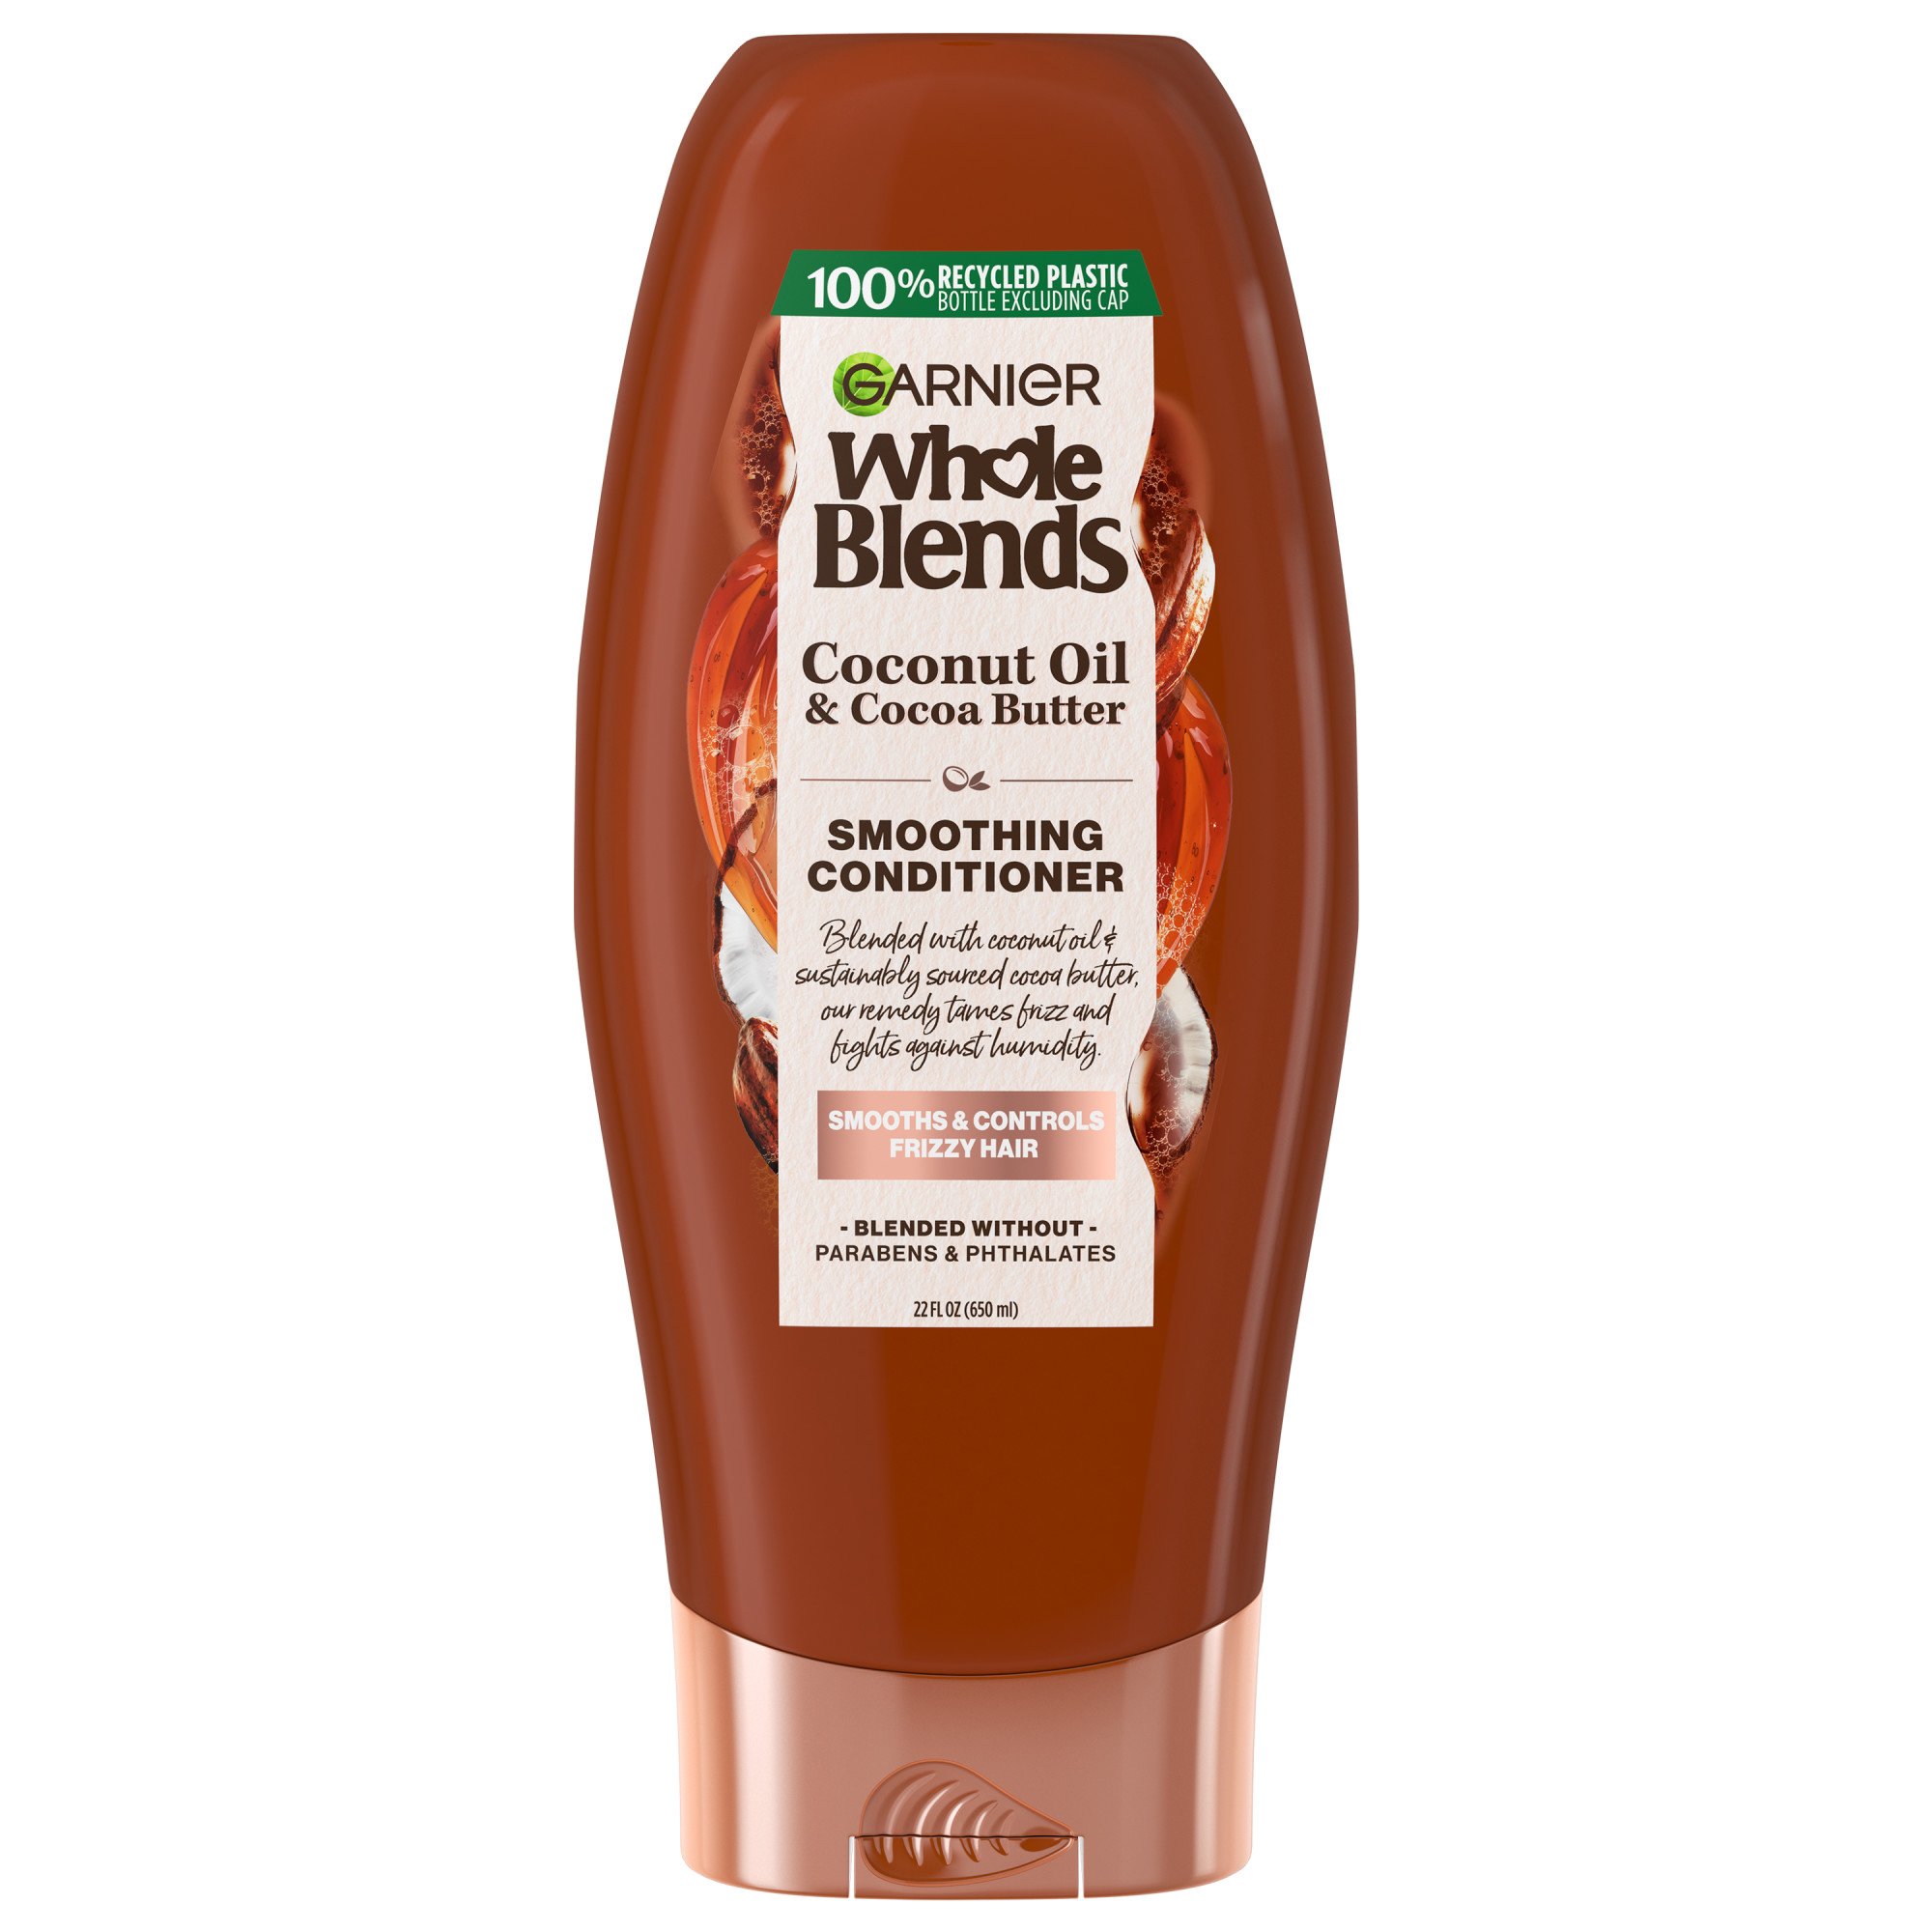 Garnier Whole Blends Conditioner With Coconut Oil Cocoa Butter